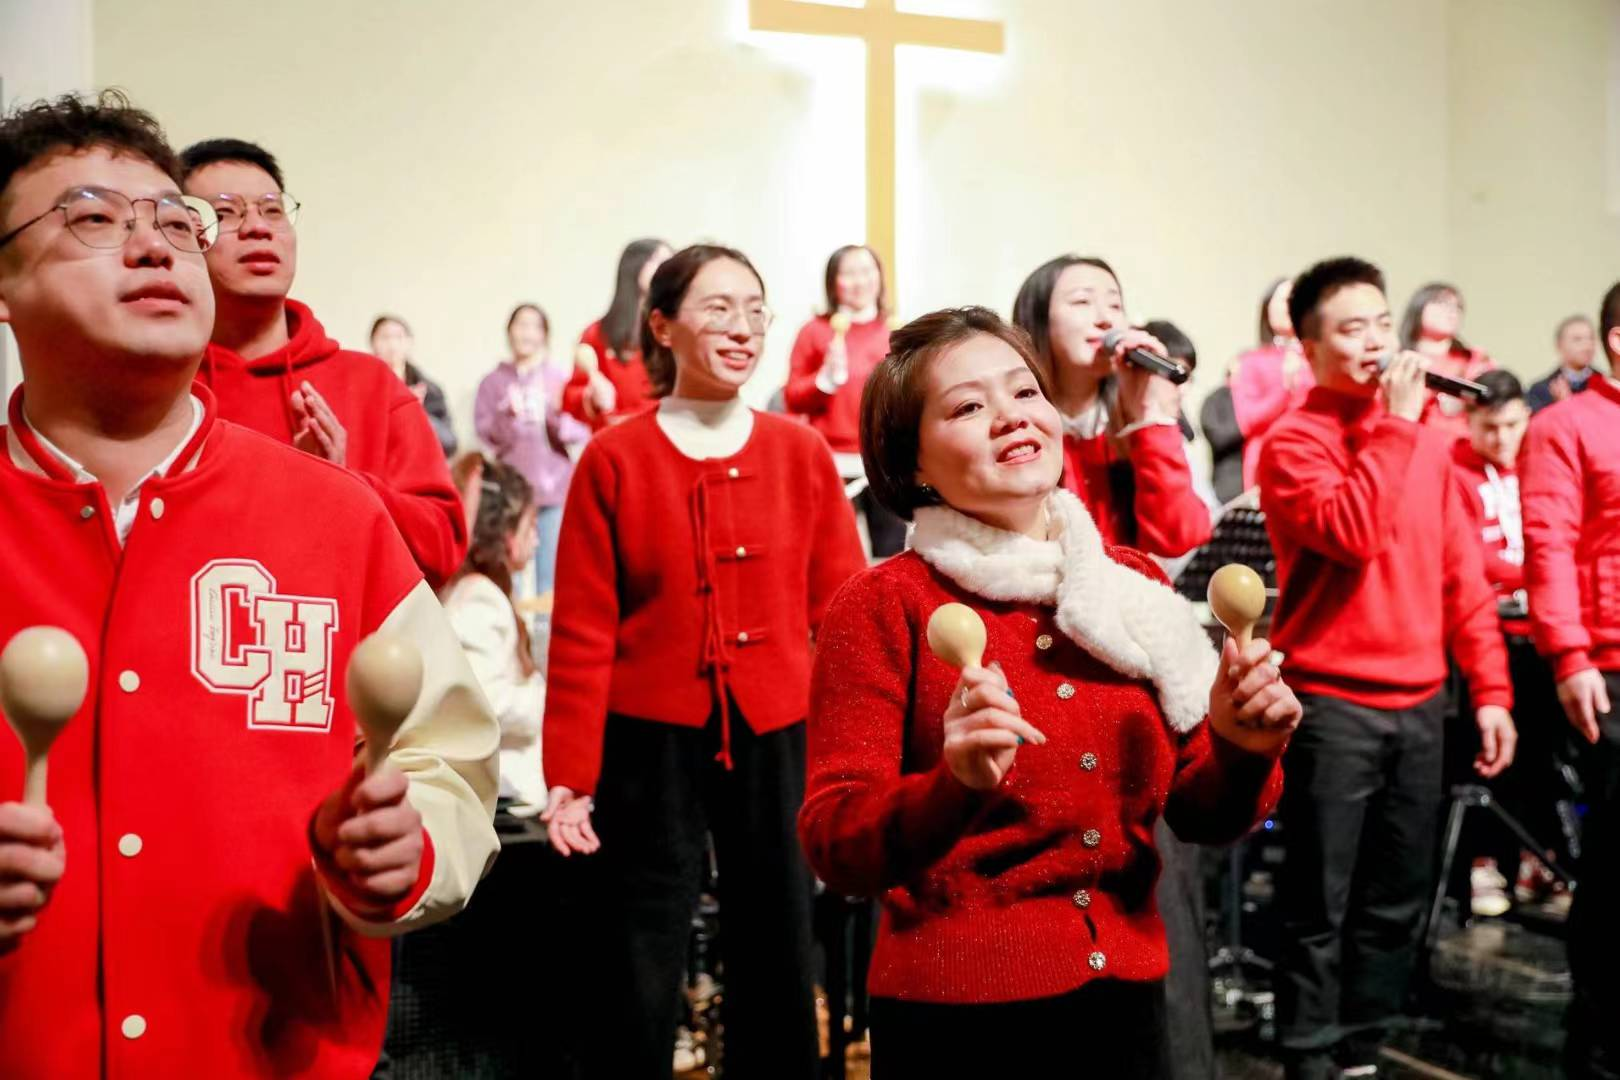 The youth fellowship of Huaxiang (Flower Lane) Church in Fuzhou, Fujian Province conducted an annual Christmas praise evening on December 24, 2023.